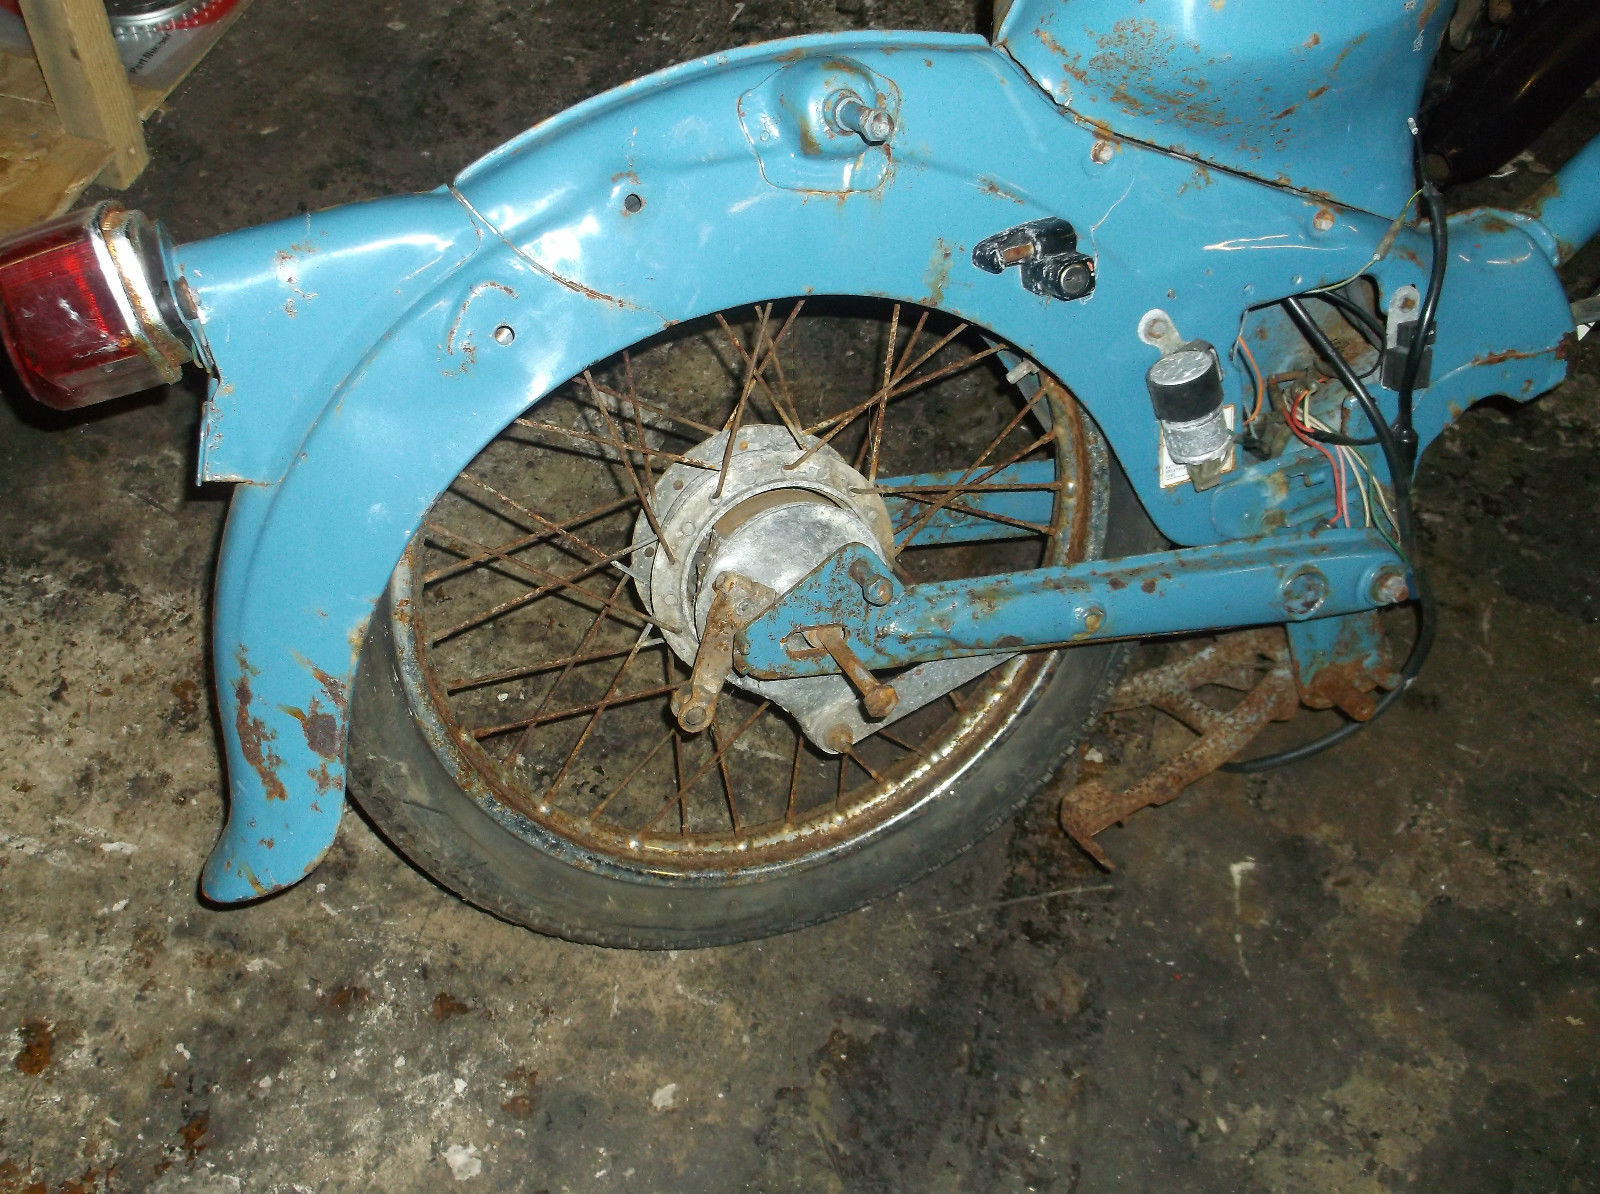 HONDA C70 YEAR UNKNOWN VIN NUMBER IS PRESENT NO V5 OR NUMBER PLATE